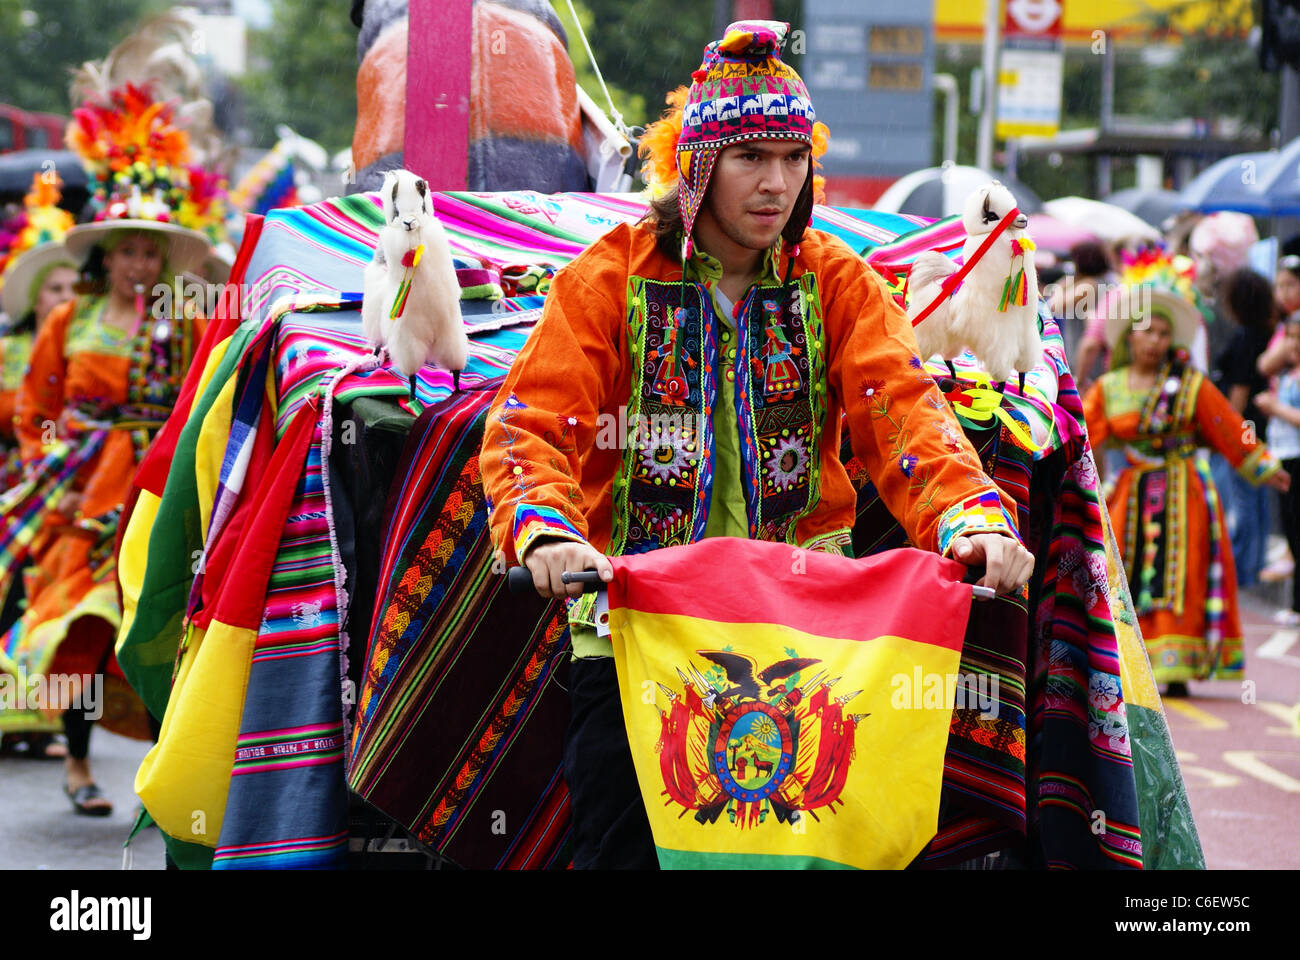 Performers at Carnaval del Pueblo, Europe's largest celebration of Latin American culture. Stock Photo